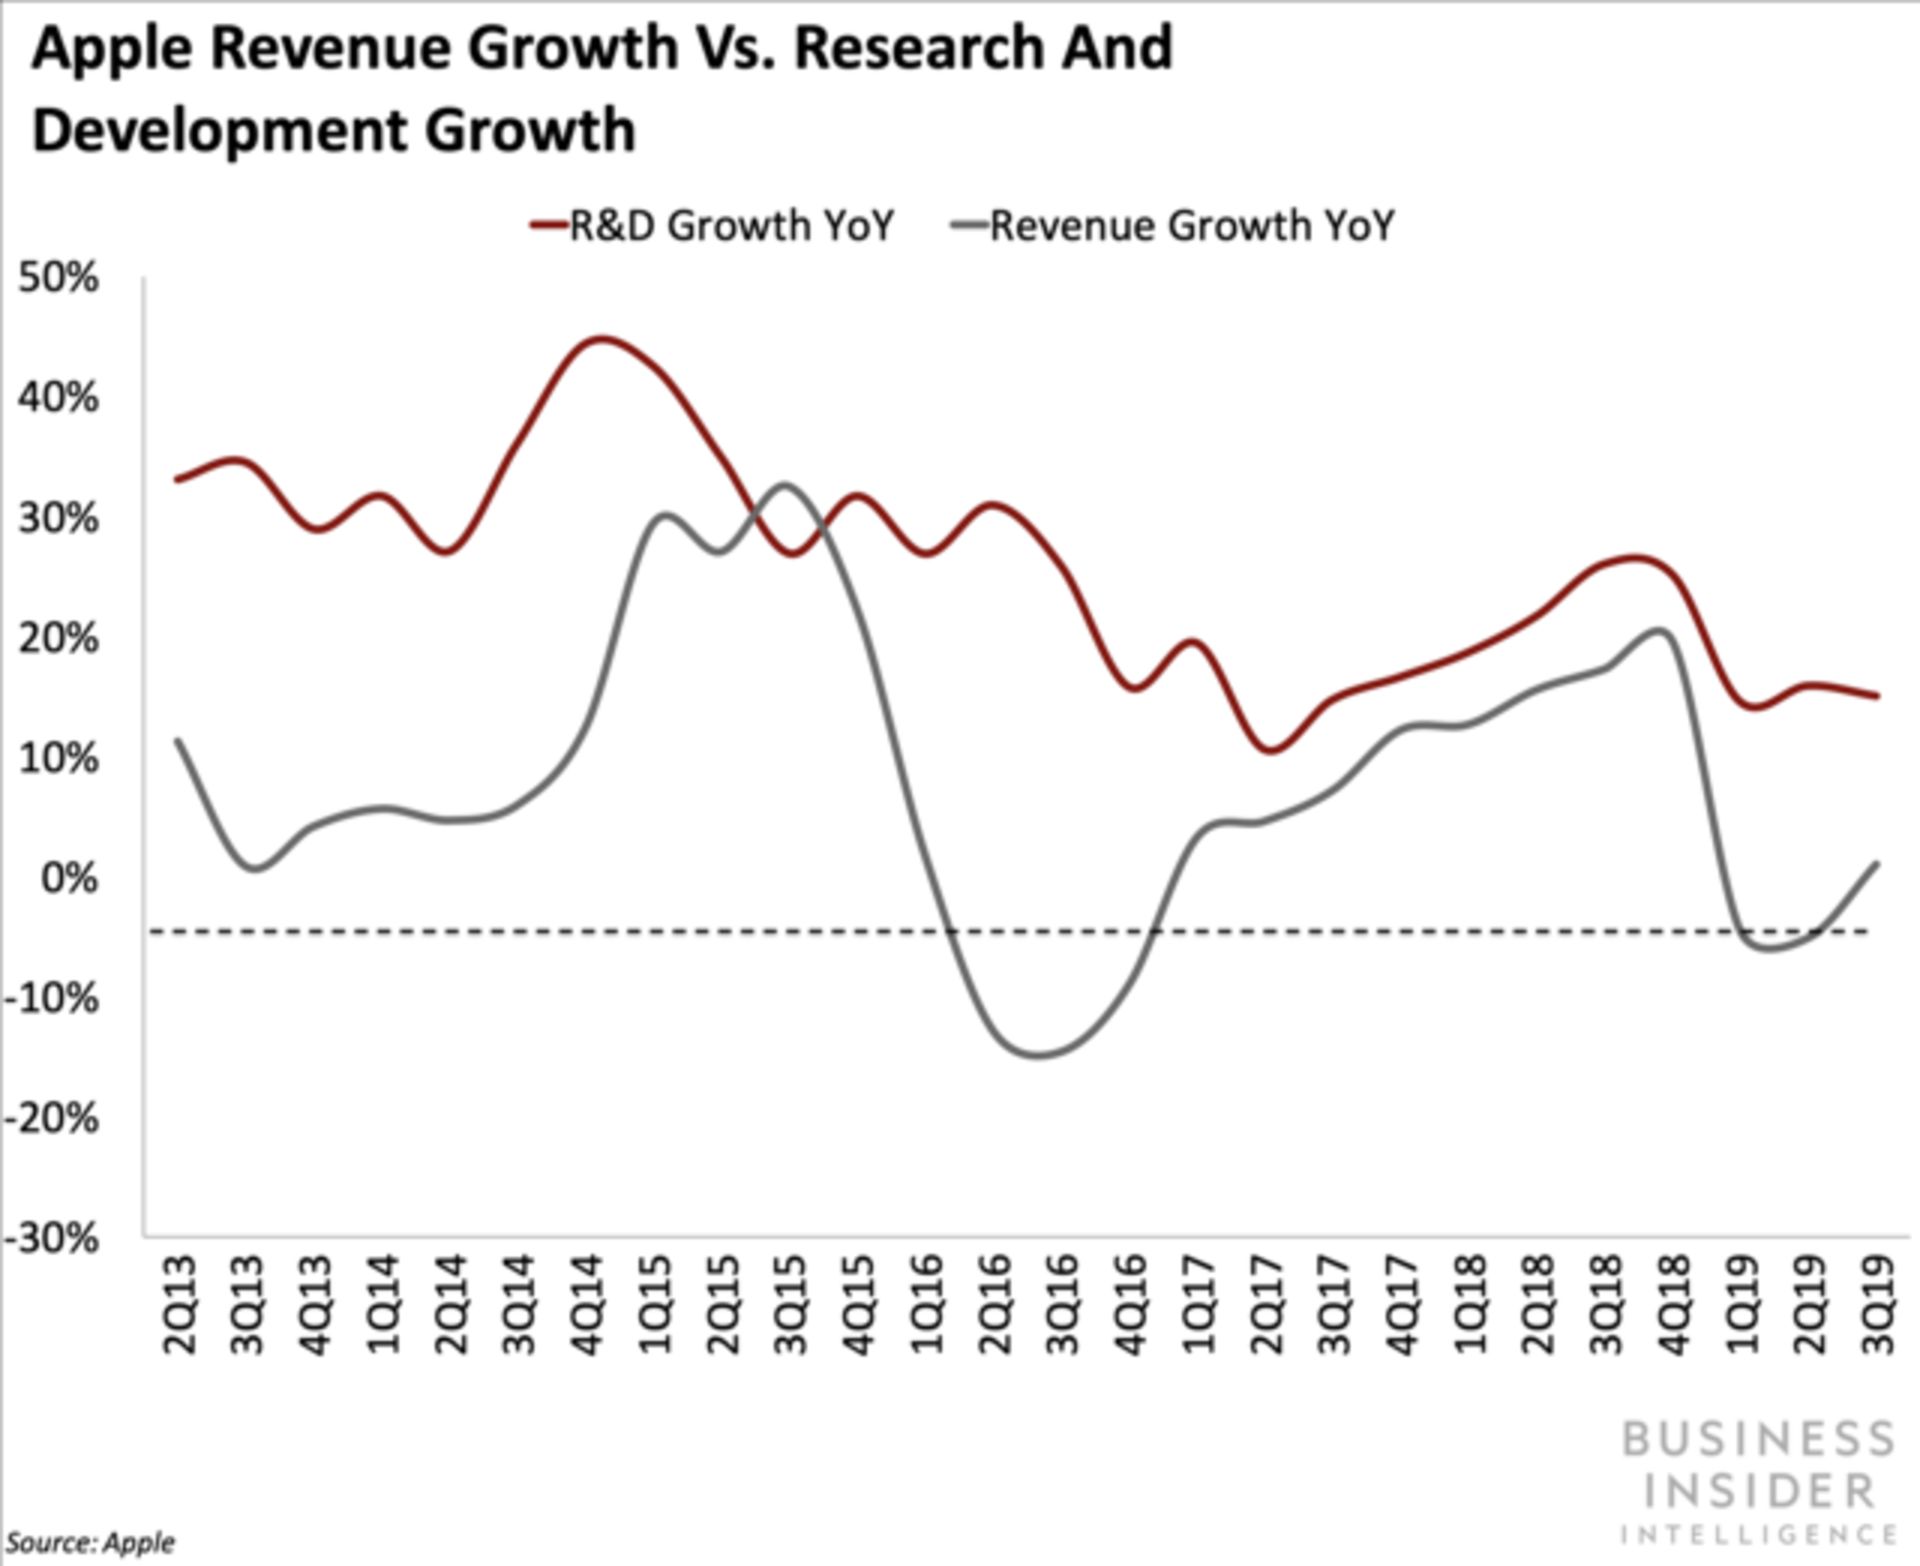 Apple research and development growth